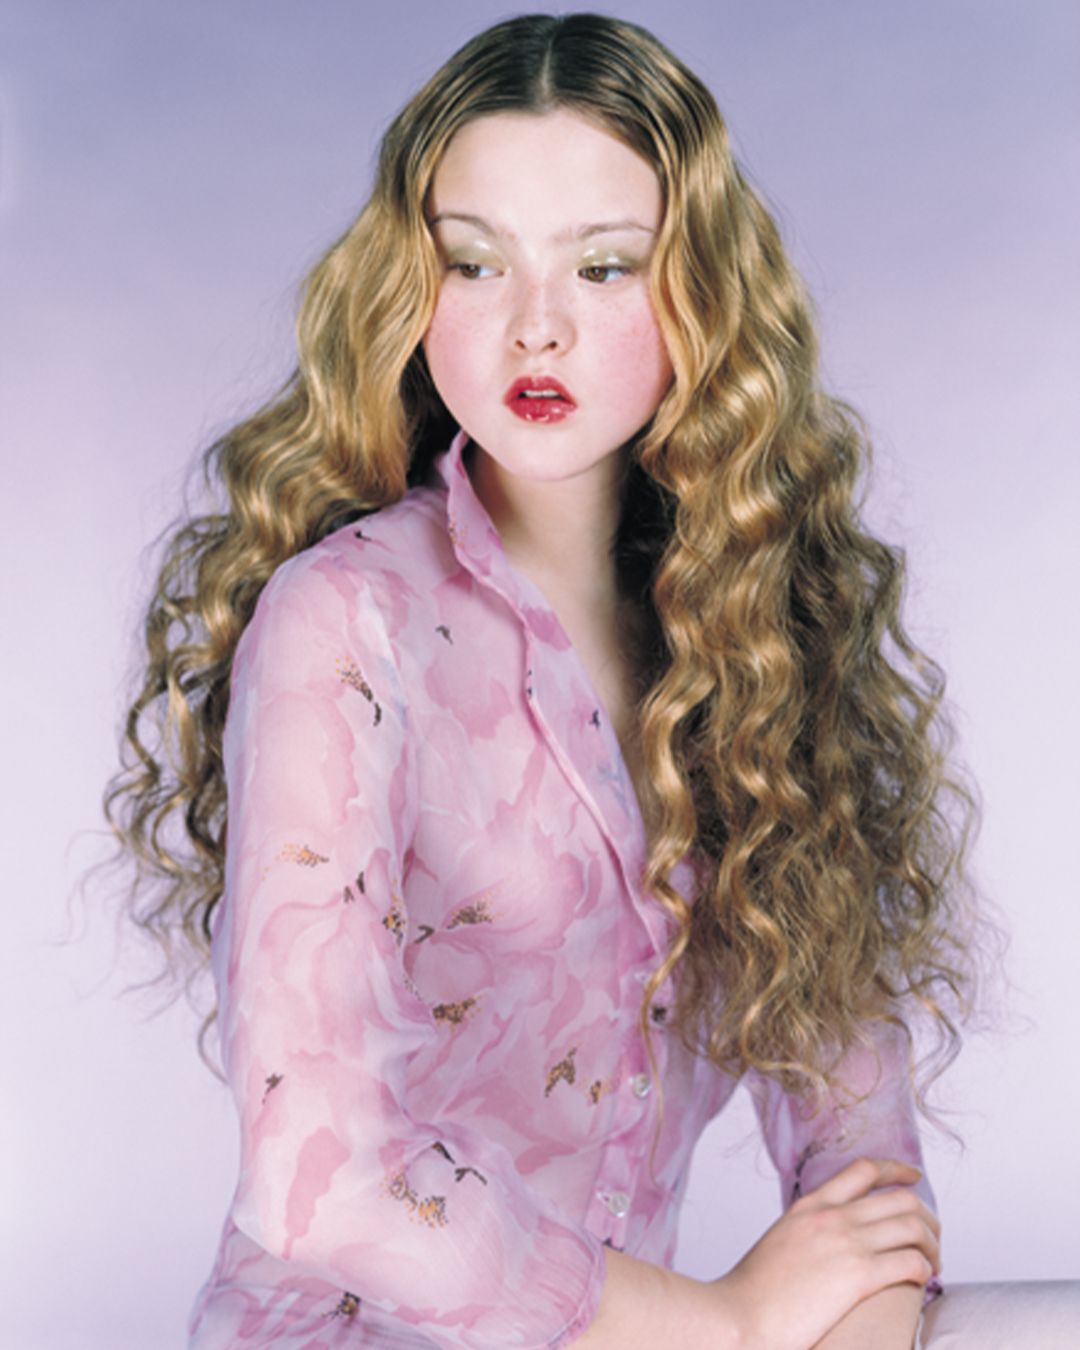 Devon Aoki posing with arms loosely crossed wearing a pink floral collared shirt